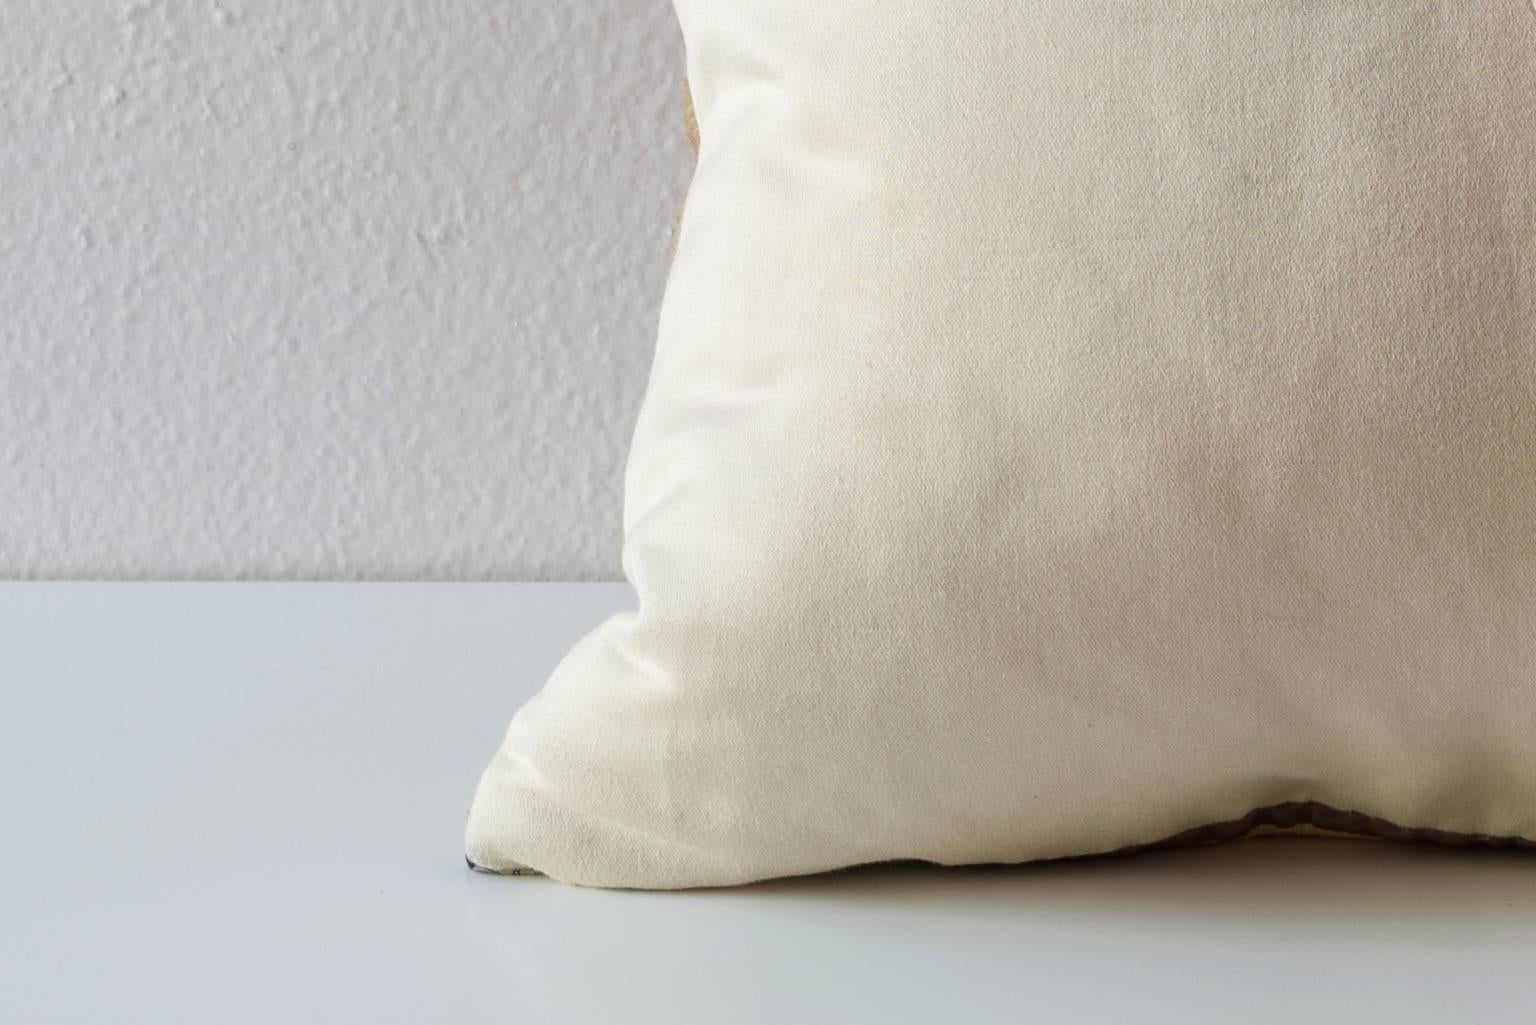 20th Century Miao Piecework Textile  Cushion in Neutral Colors